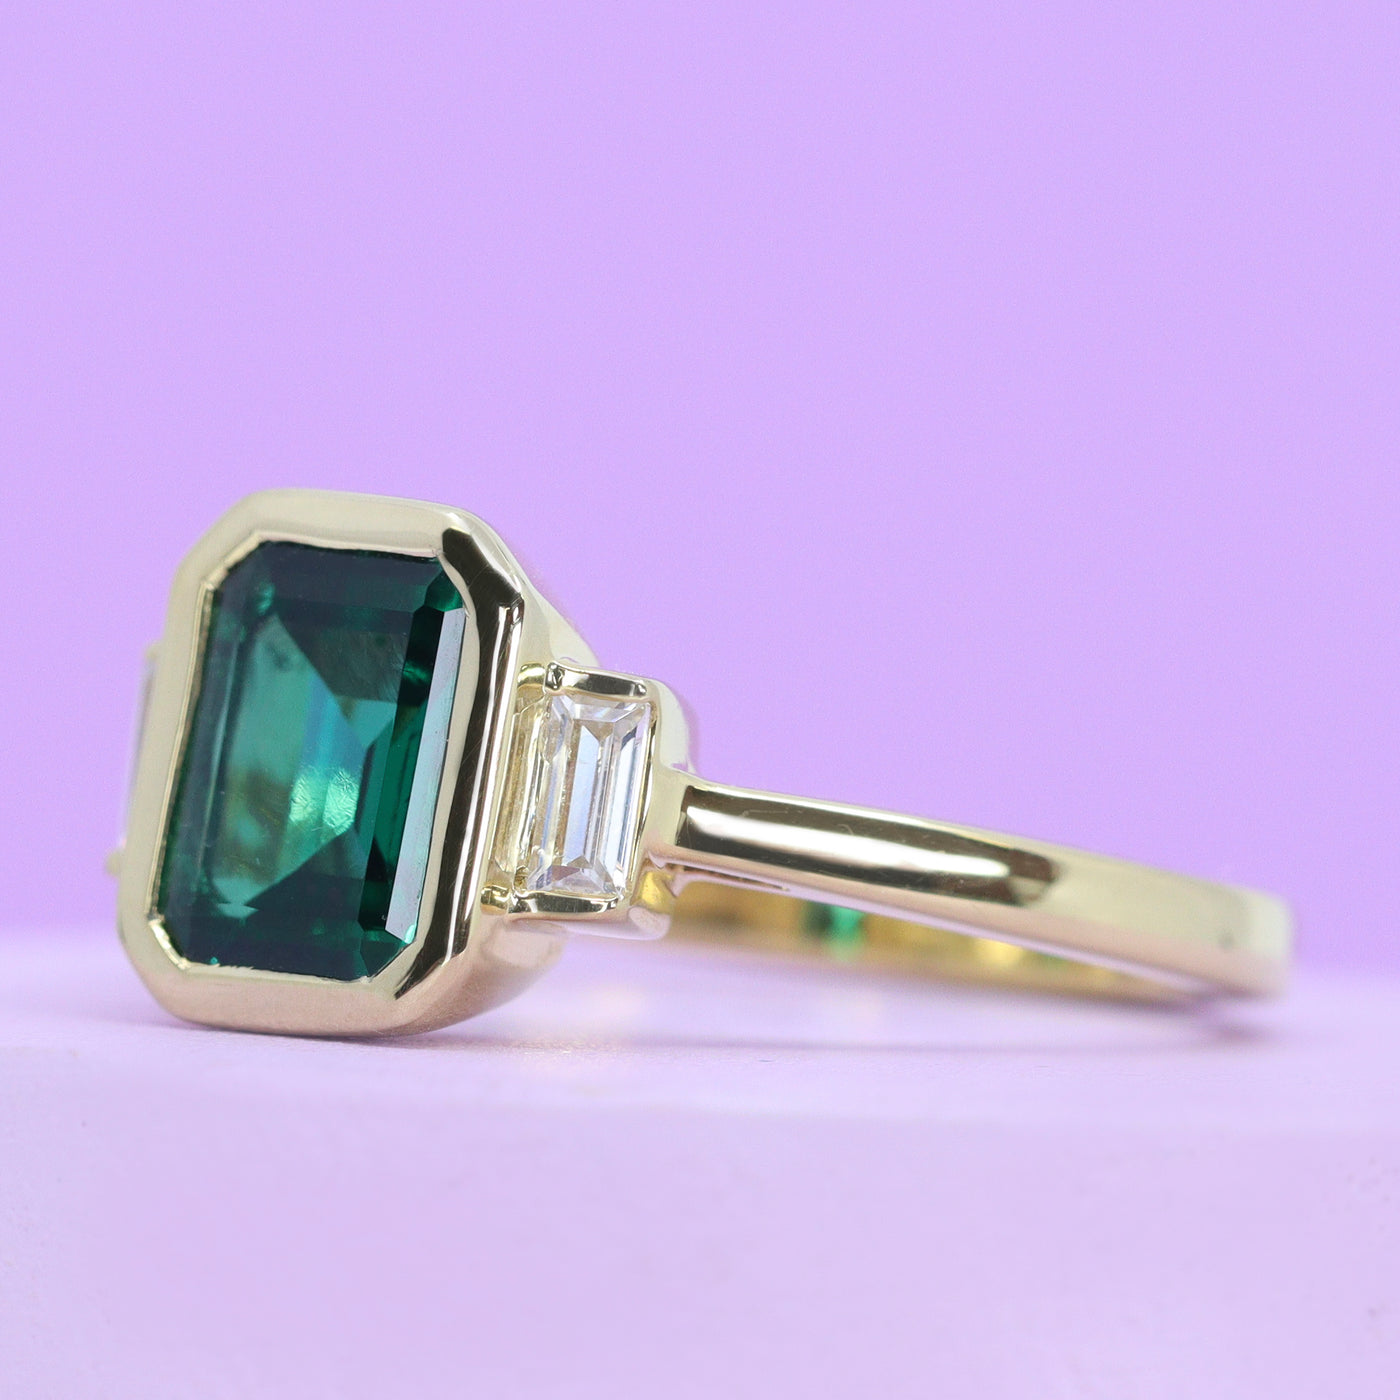 Phoebe - Octagon/Emerald Cut Earth or Lab Grown Emerald Bezel Set Modern Art Deco Engagement Ring with Baguette Diamonds - Custom Made-to-Order Design